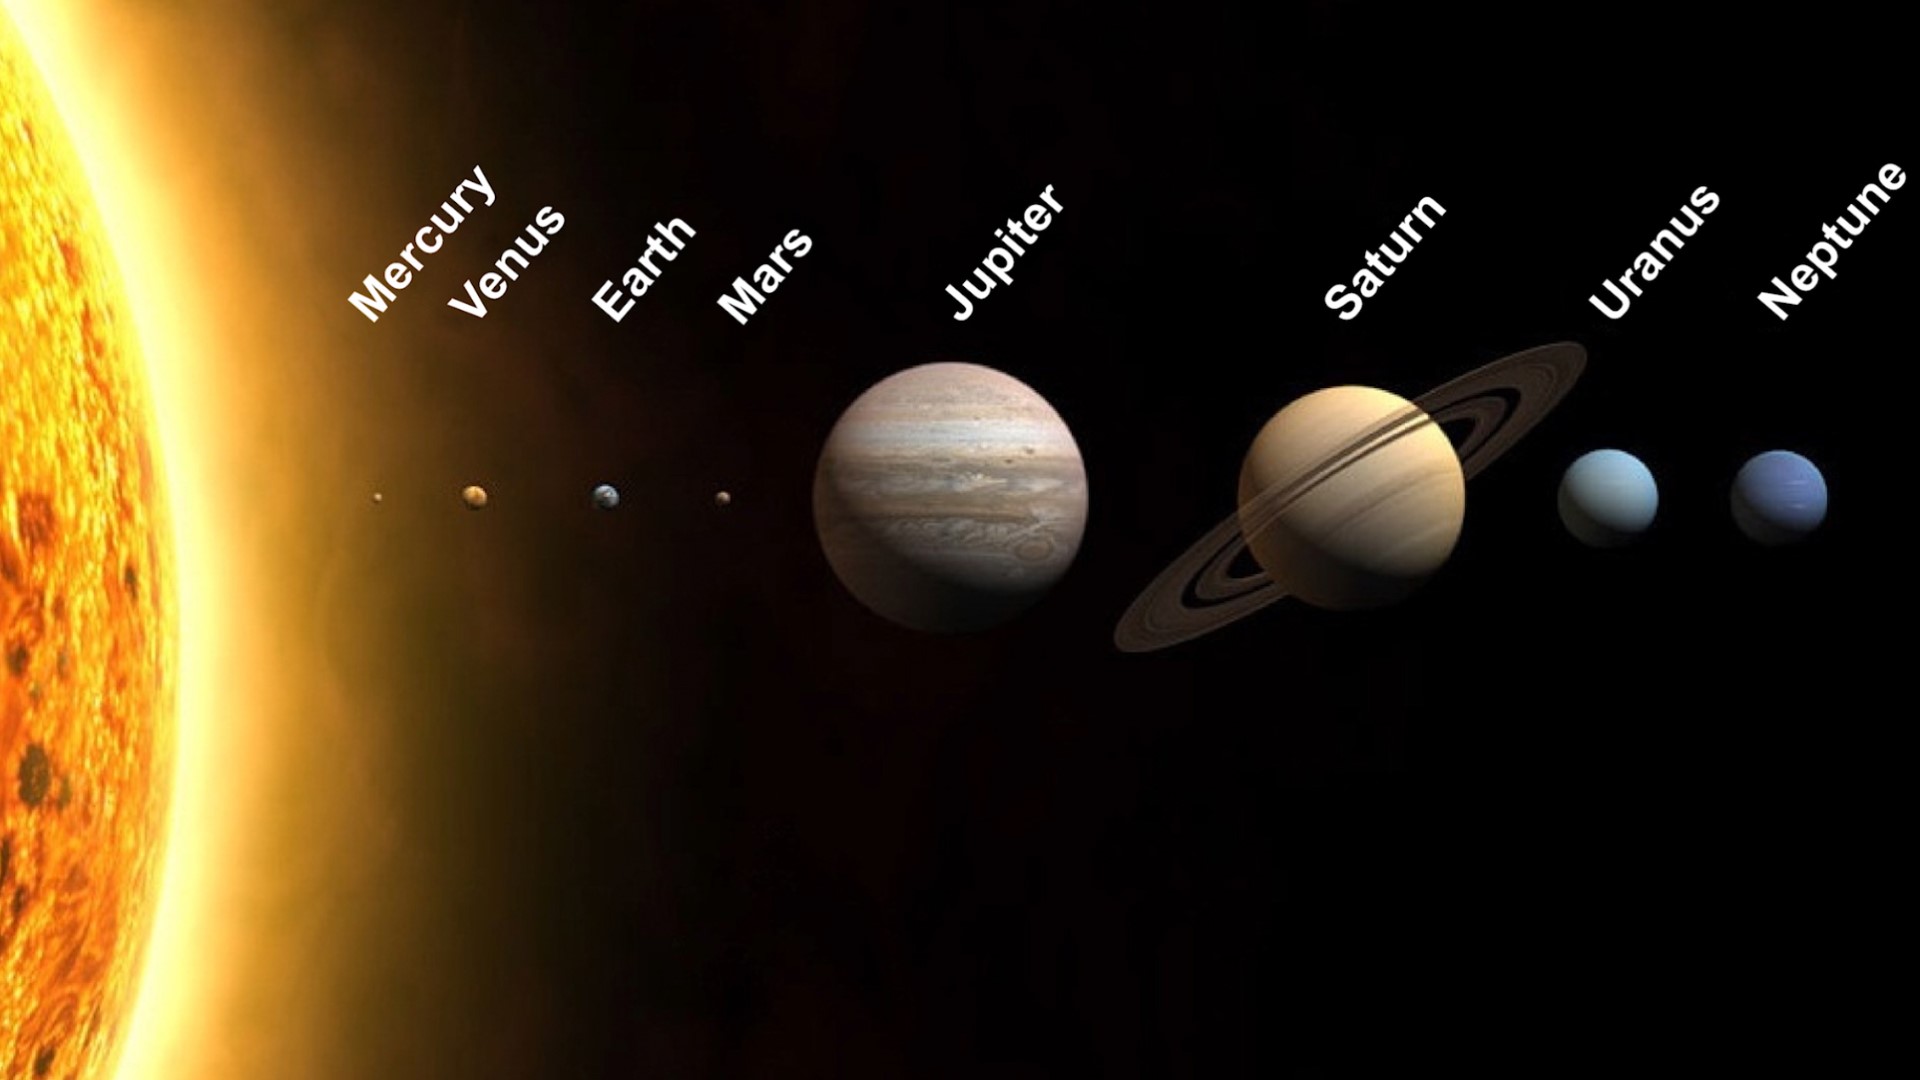 Here's when all 8 in our solar system will align